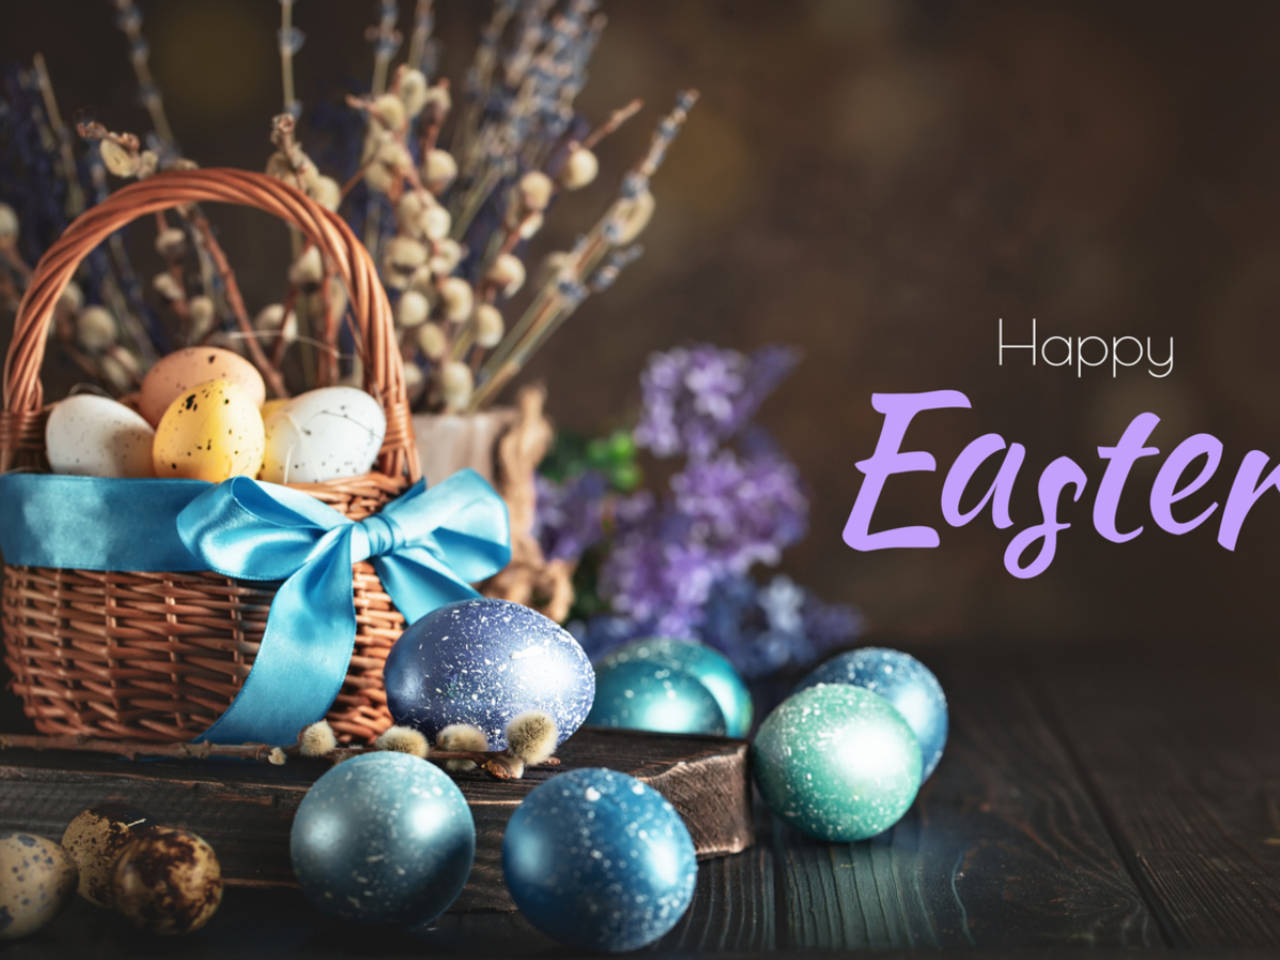 Collection of 999+ Stunning Easter Wishes Images in Full 4K